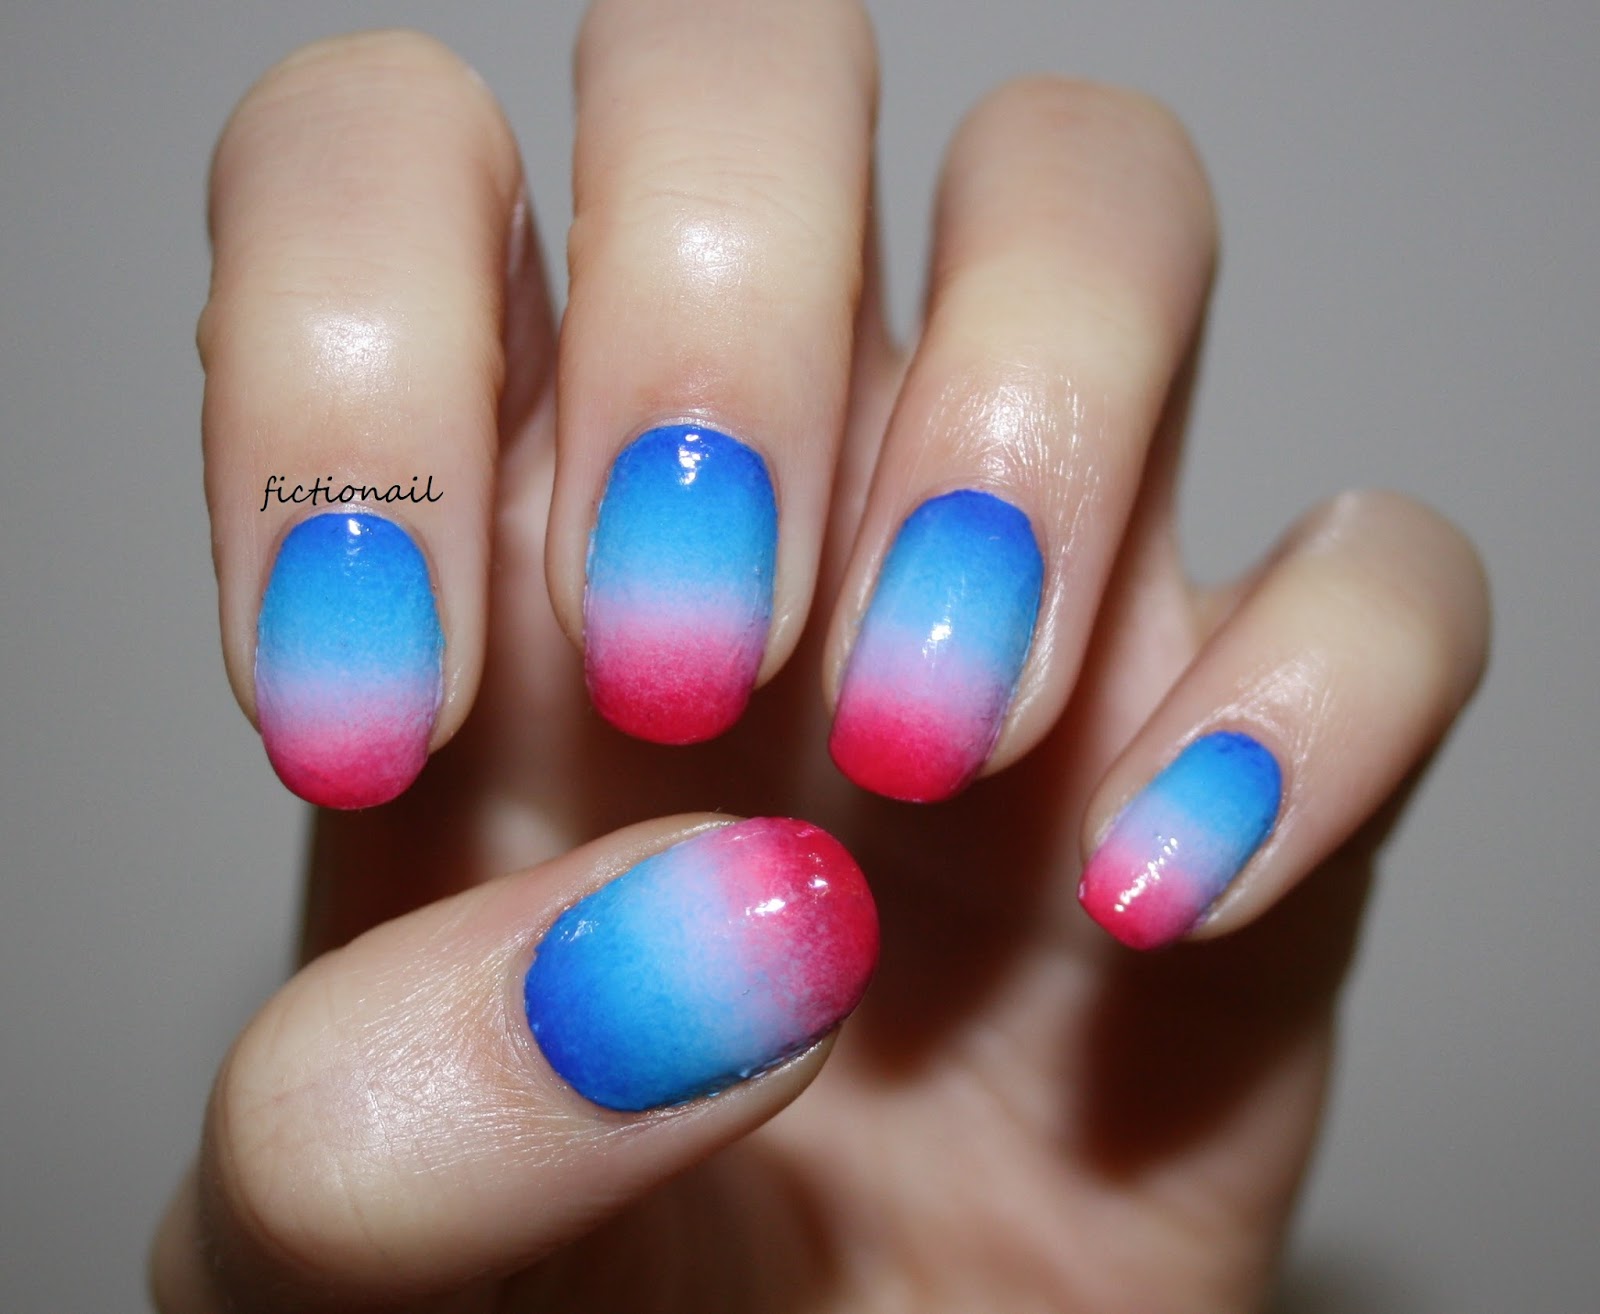 6. Purple and Pink Gradient Nail Art Design on Tumblr - wide 3